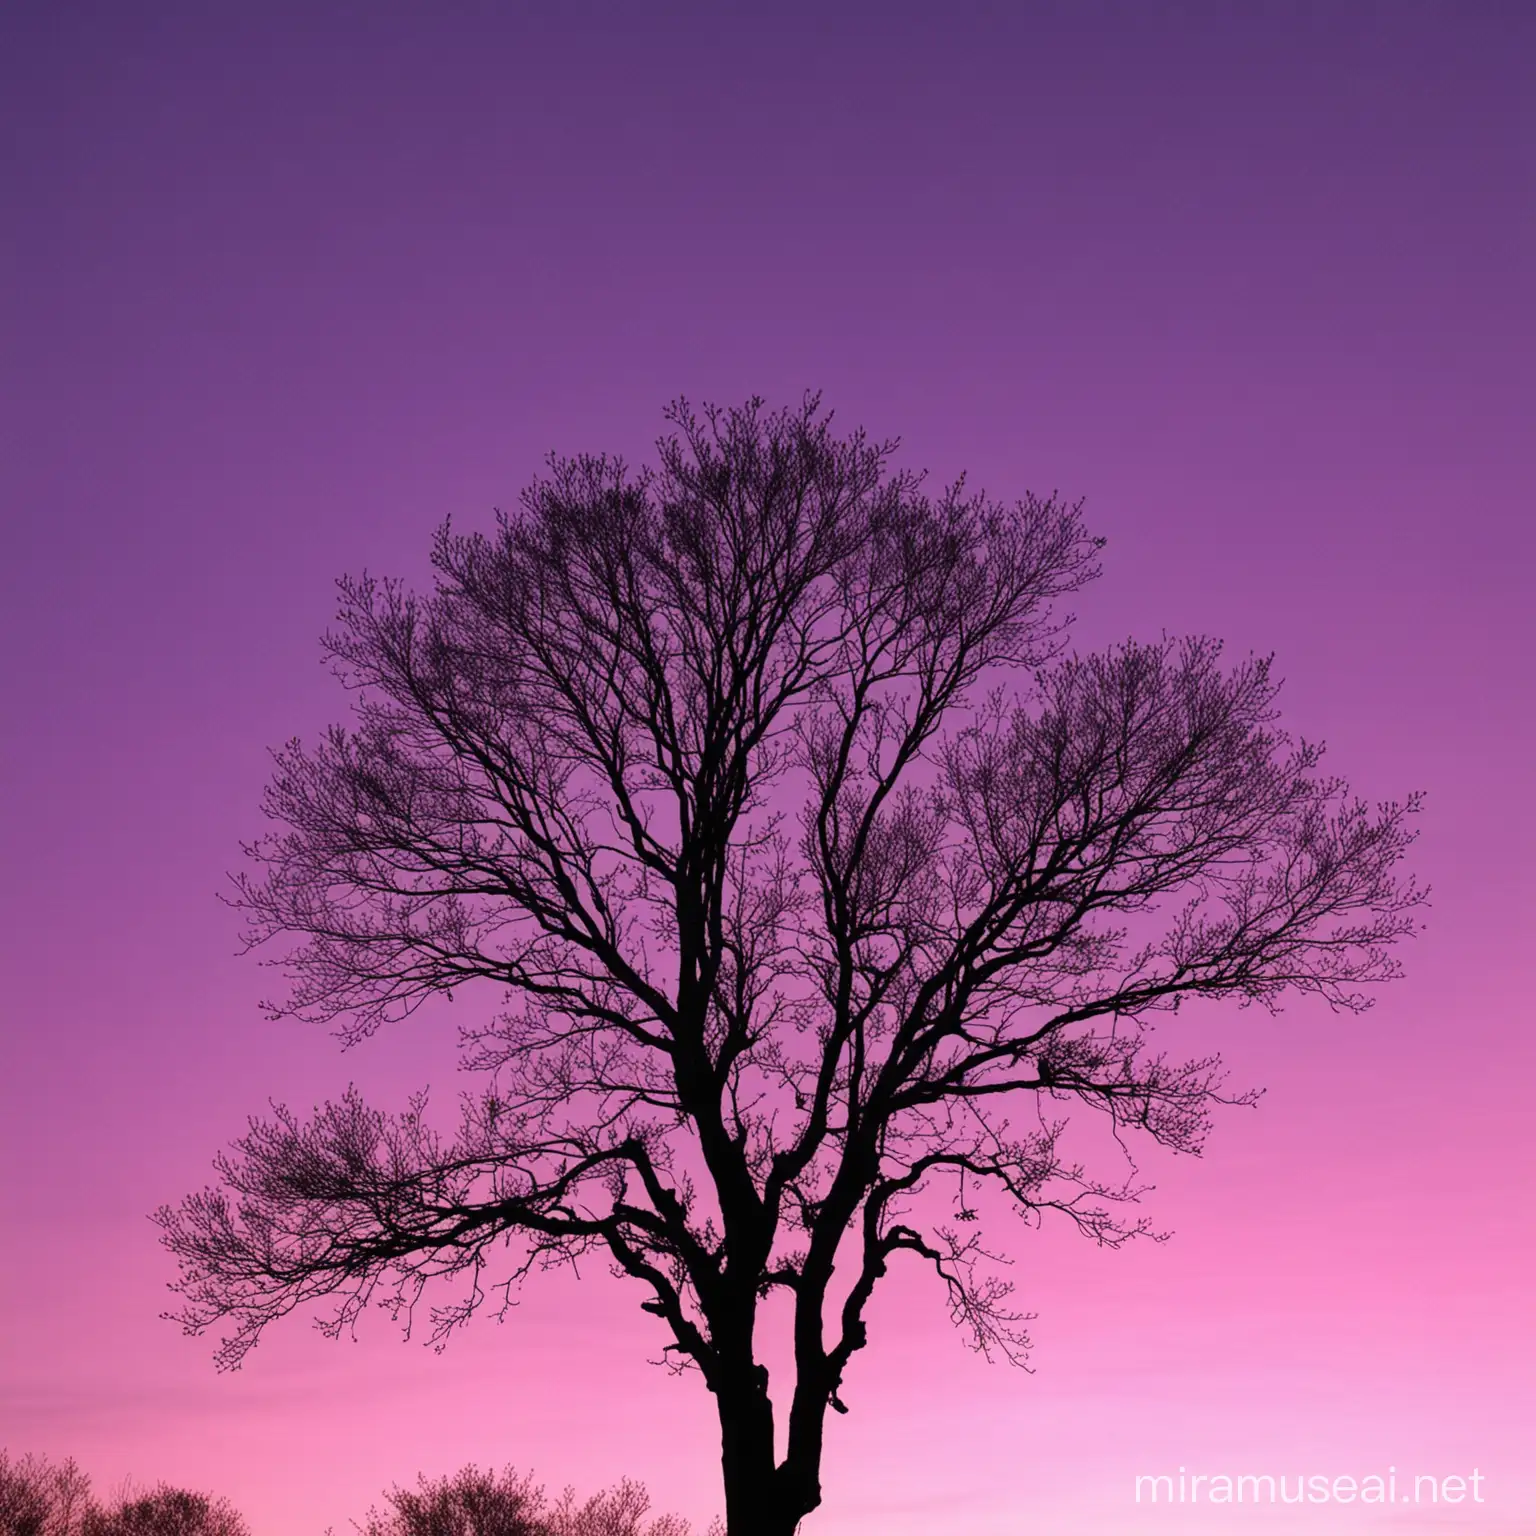 Purple Pink Sky with Tree Silhouette at Dusk